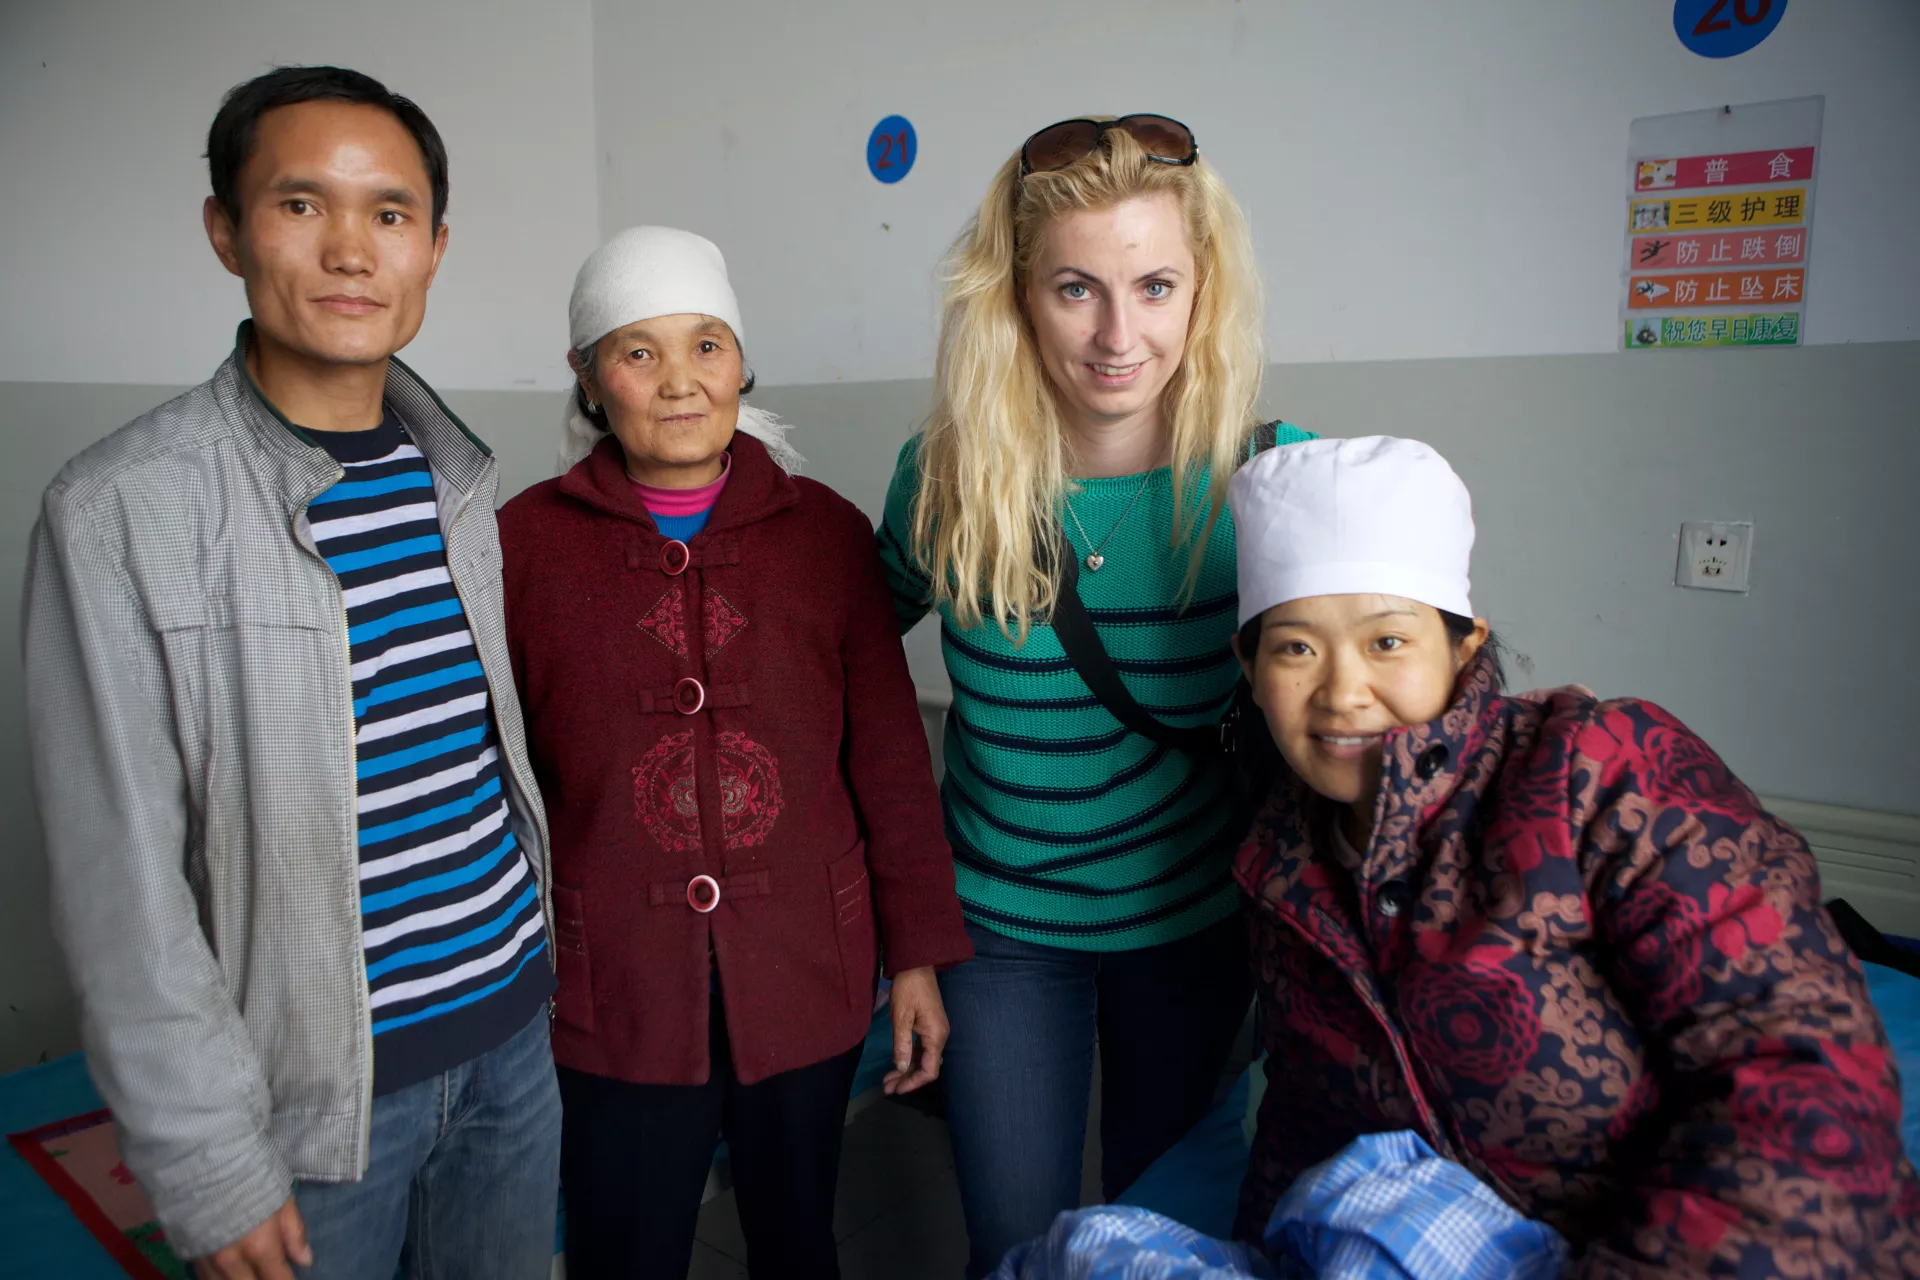 Jovita Majauskaite of the Lithuanian National Committee visits a maternity waiting room in Qinghai Province.